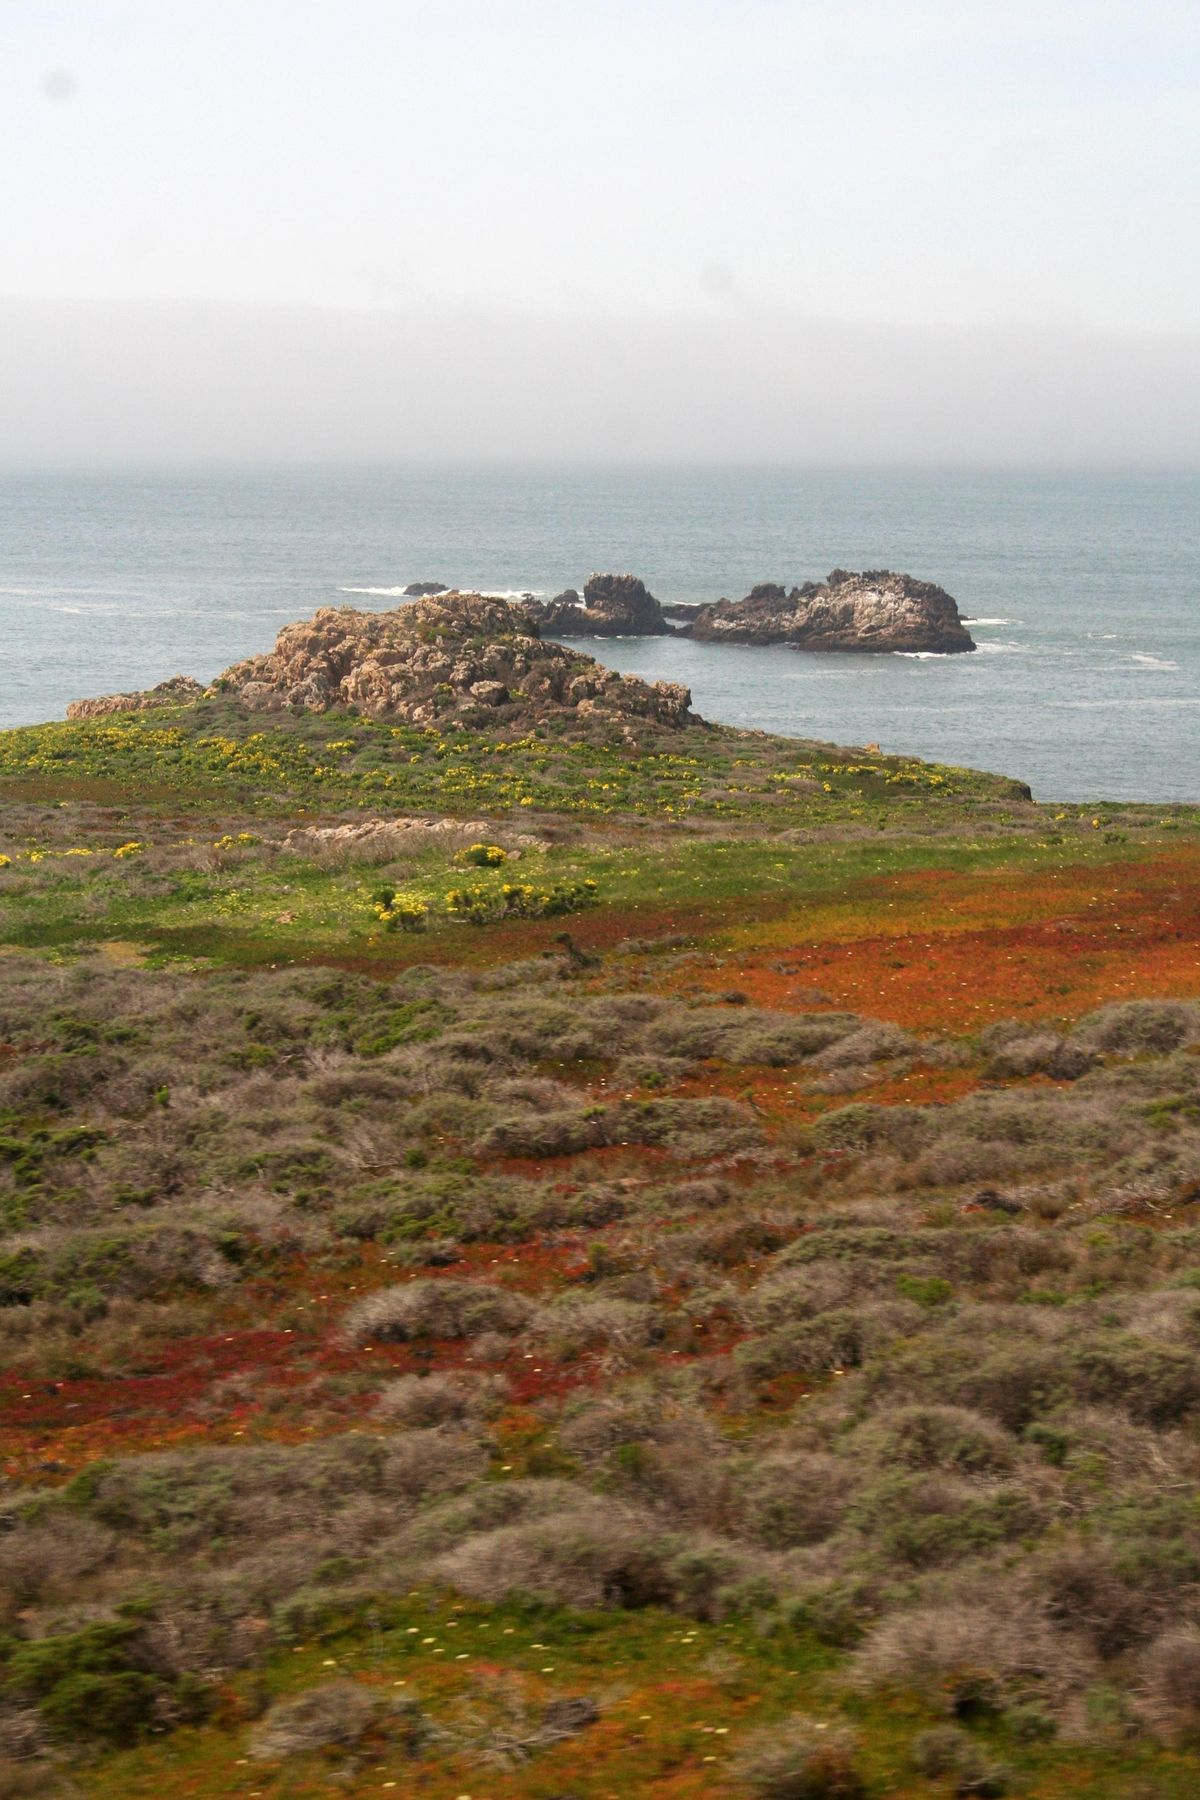 Fields of yellow and orange wildflowers give way to remote ocean cliffs on the Coast Starlight’s journey along California’s central coast. (Photos by Laura Randall/For The Washington Post)